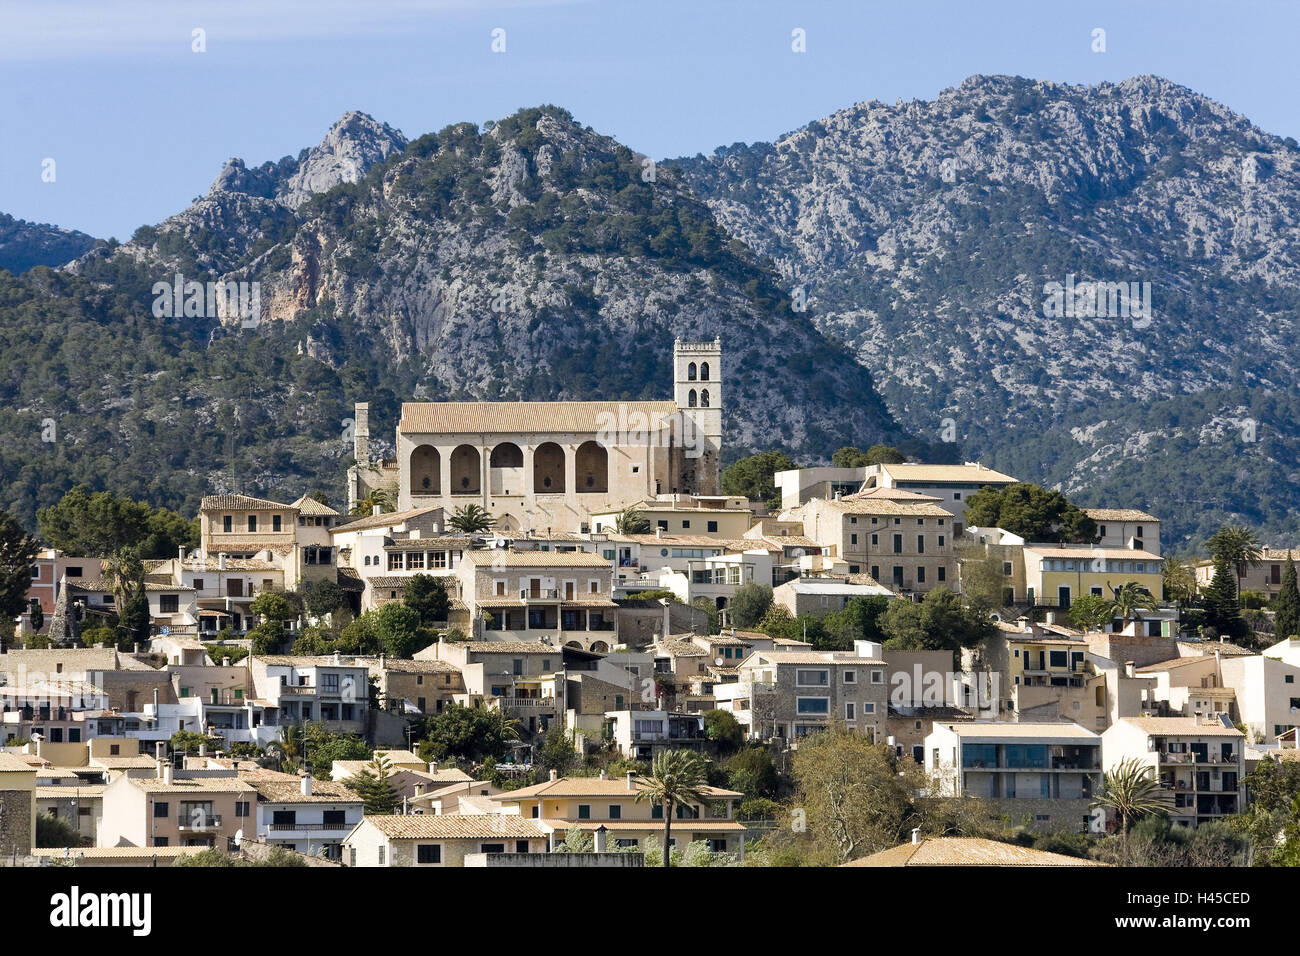 Spain, the Balearic Islands, island Majorca, Selva, town view, parish church, background, Tramuntana mountains, mountains, mountains, Tramuntana, imposingly, picturesquely, scenery, spring, town, provincial town, small town, church, Stock Photo